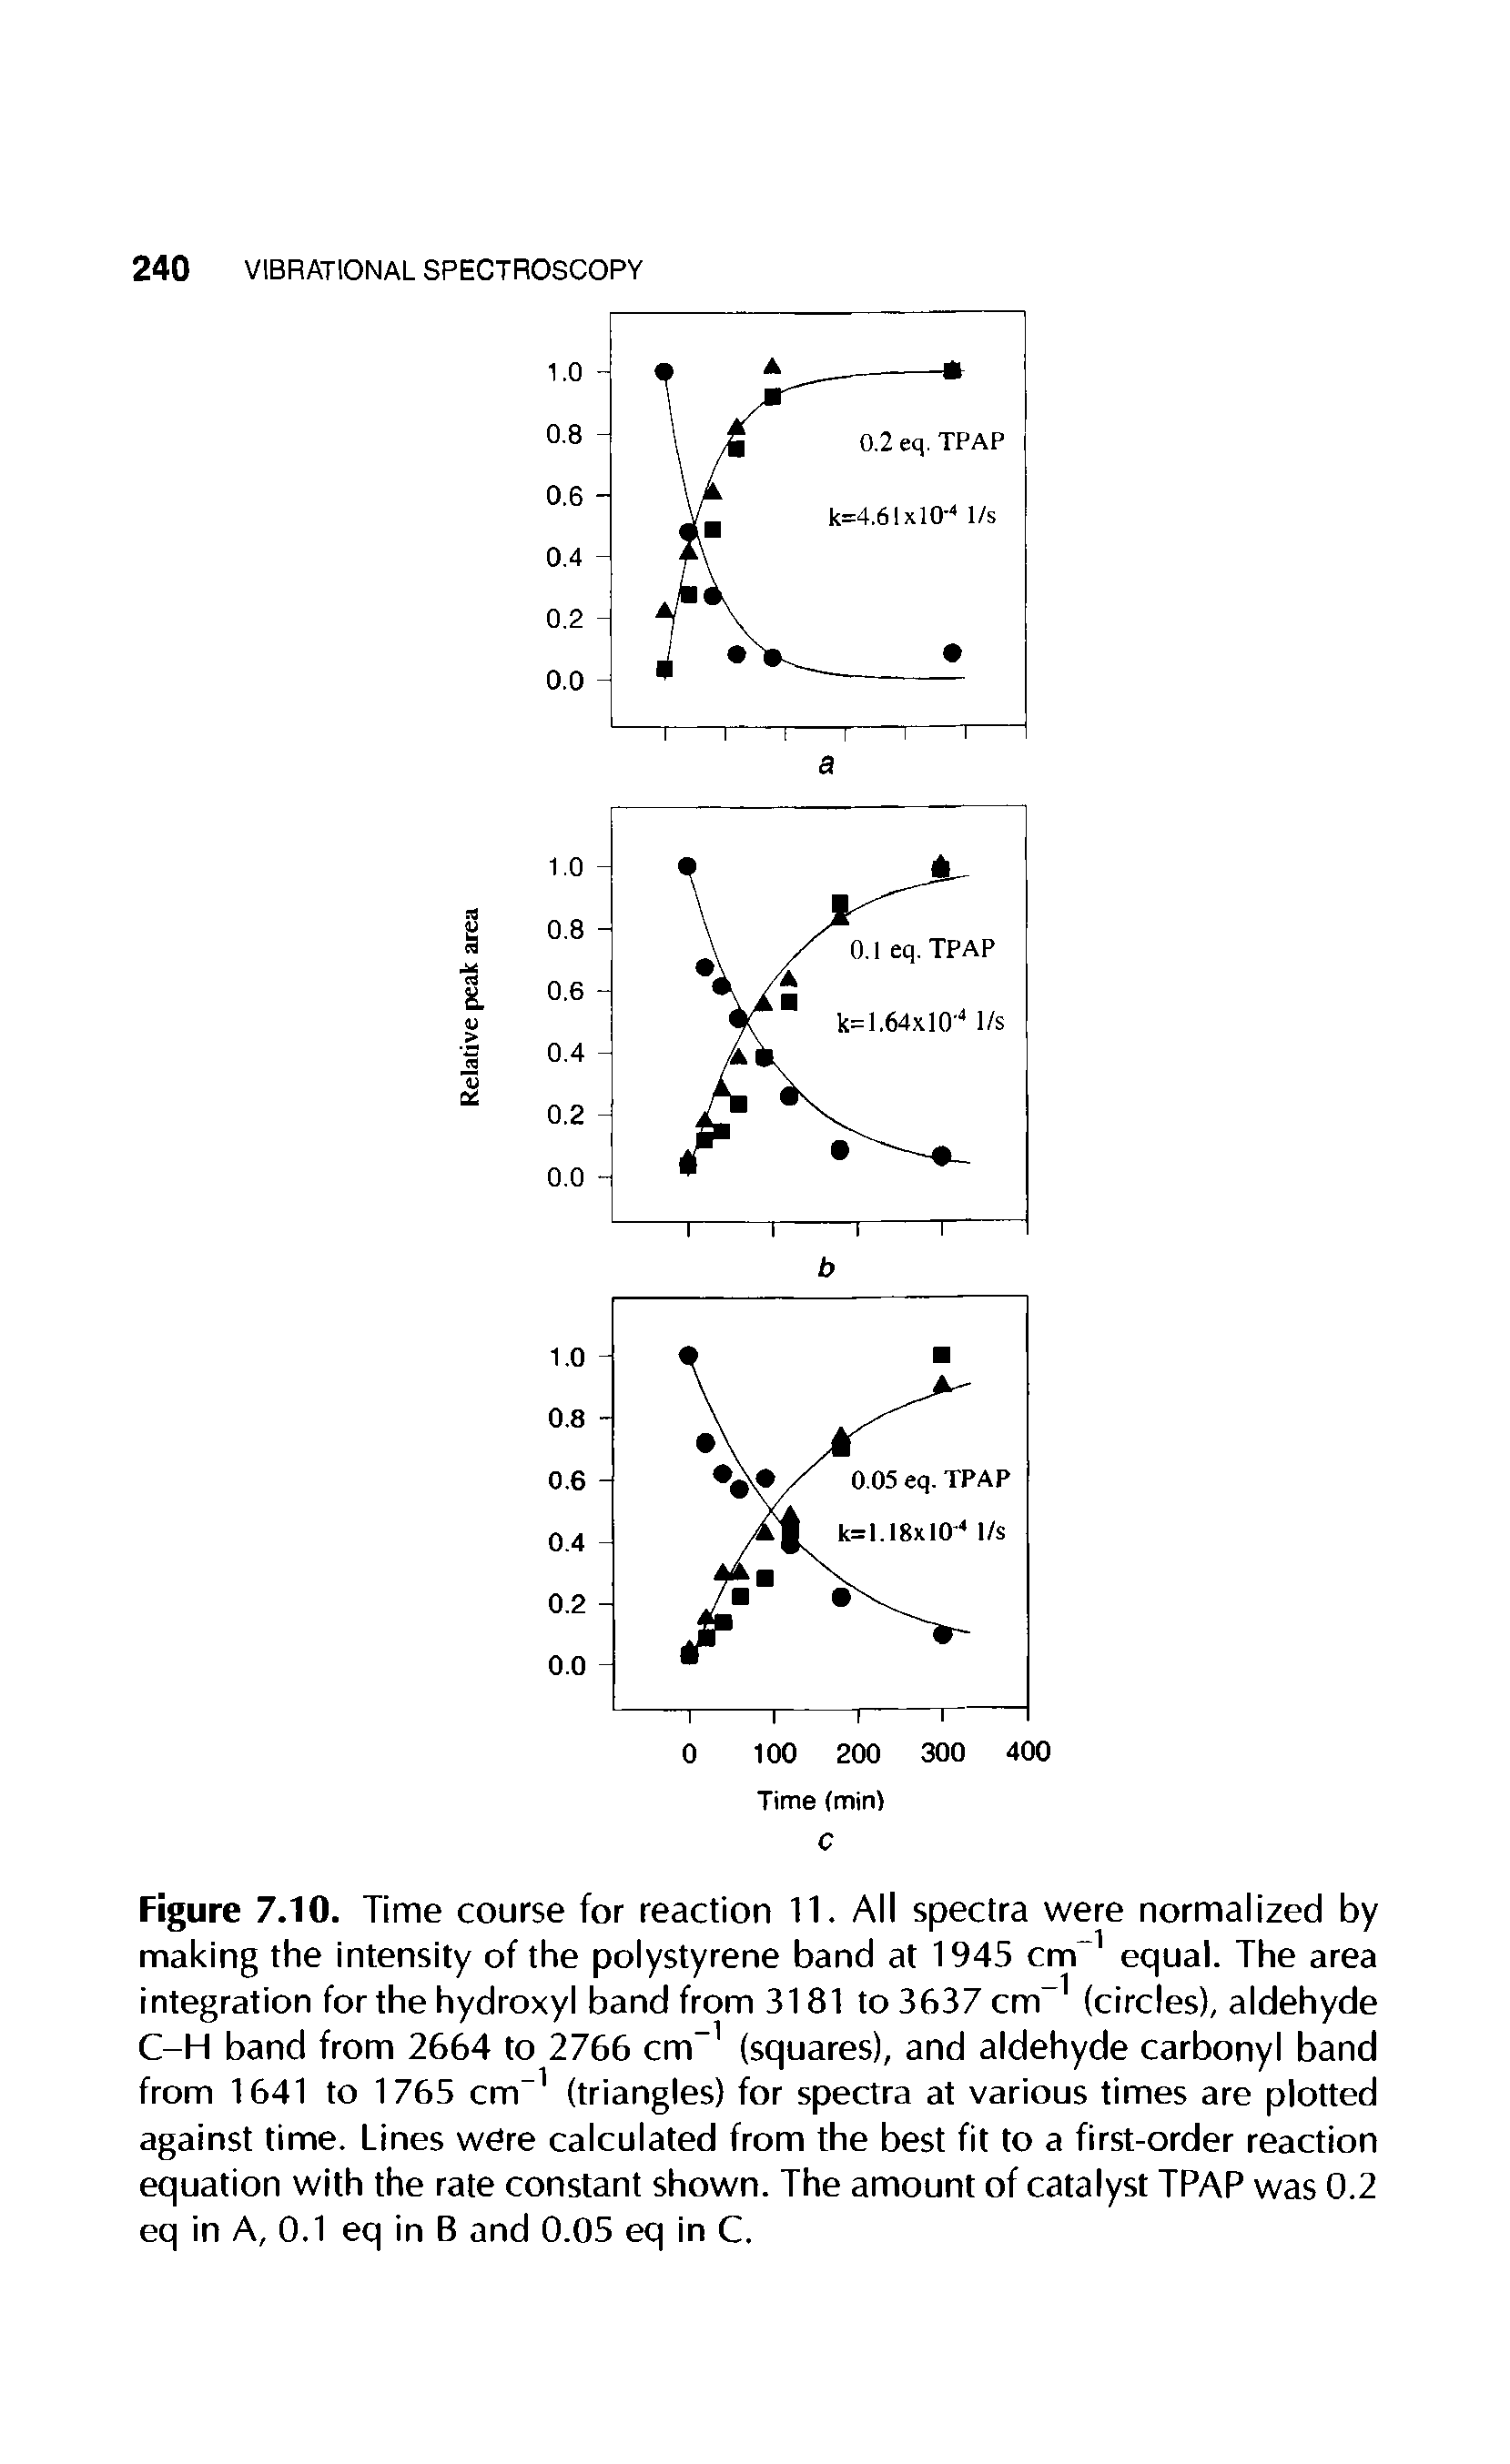 Figure 7.10. Time course for reaction 11. All spectra were normalized by making the intensity of the polystyrene band at 1945 cm 1 equal. The area integration for the hydroxyl band from 3181 to 3637 cm-1 (circles), aldehyde C-H band from 2664 to 2766 cm-1 (squares), and aldehyde carbonyl band from 1641 to 1765 cm-1 (triangles) for spectra at various times are plotted against time. Lines were calculated from the best fit to a first-order reaction equation with the rate constant shown. The amount of catalyst TPAP was 0.2 eq in A, 0.1 eq in B and 0.05 eq in C.